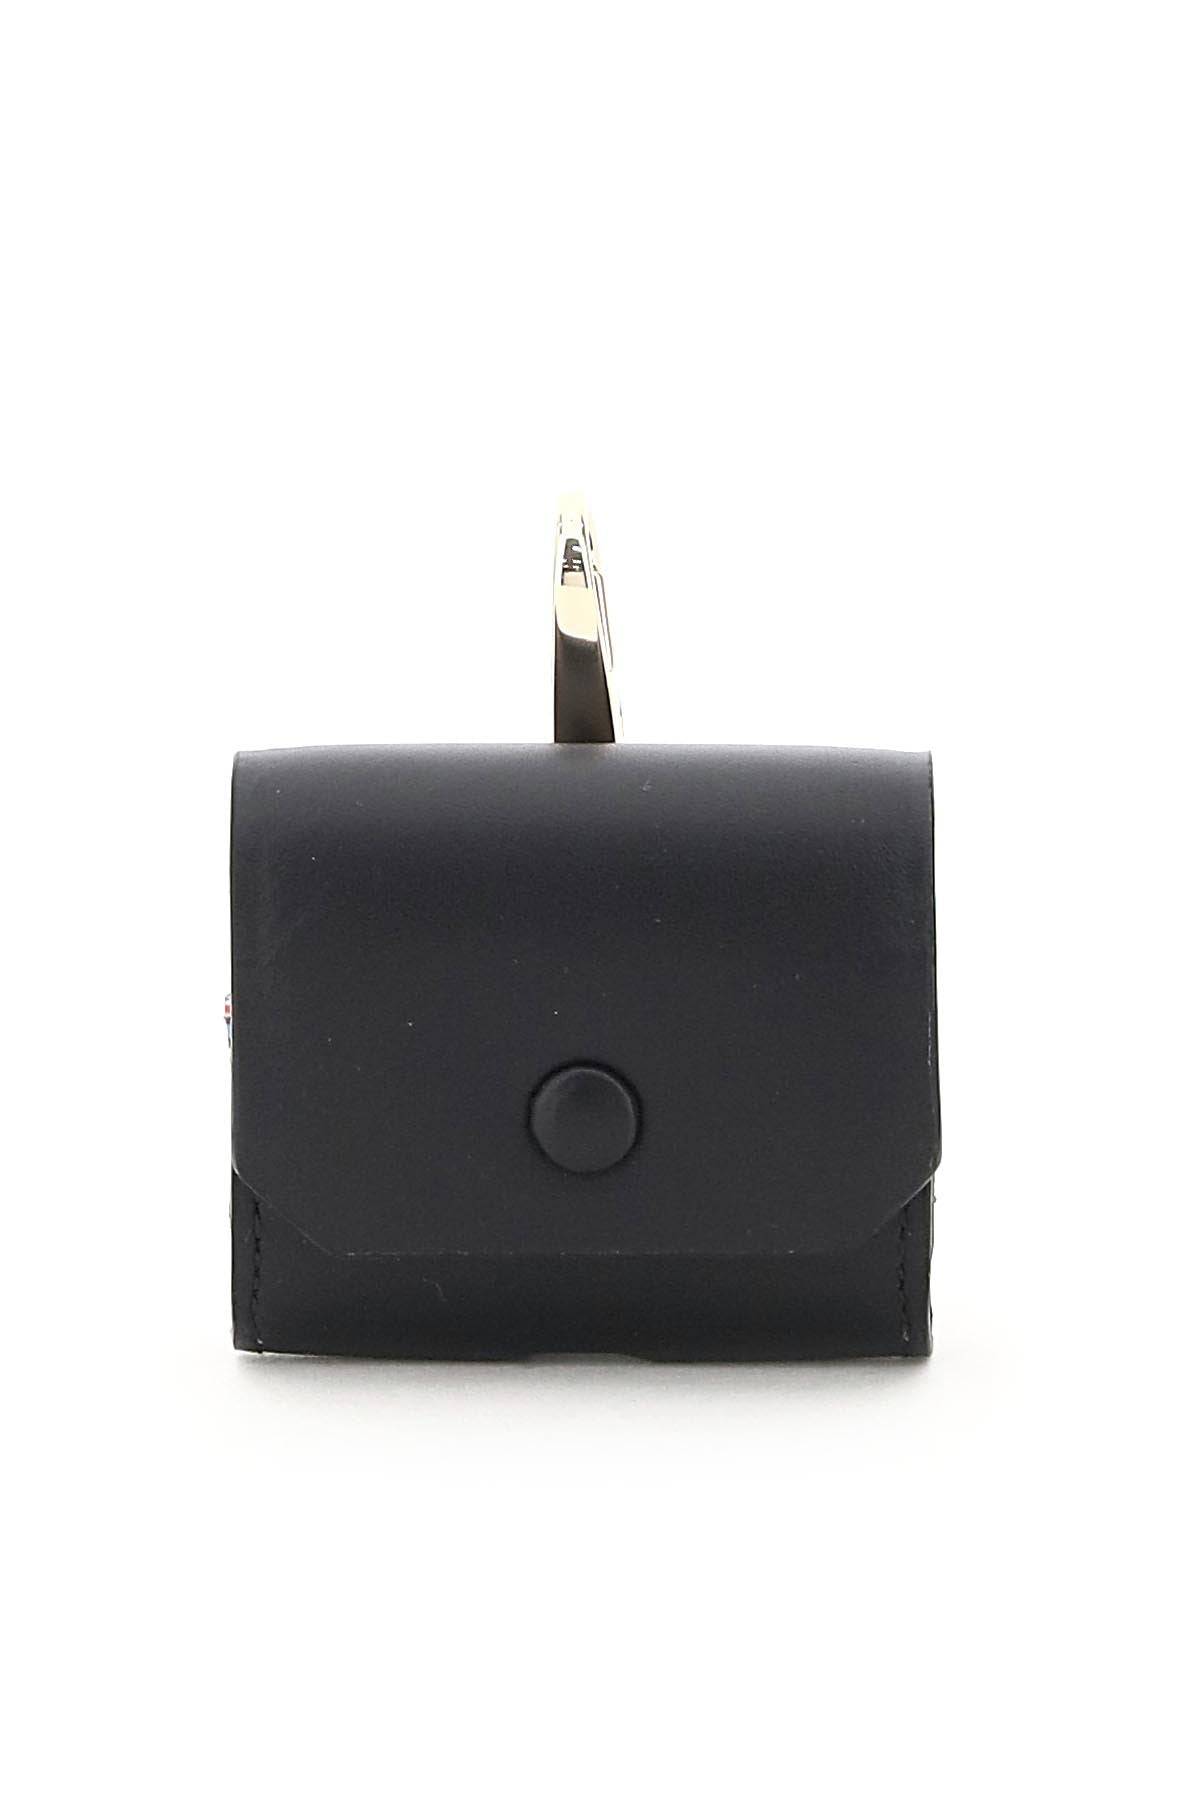 Paul Smith Airpods Case   Black